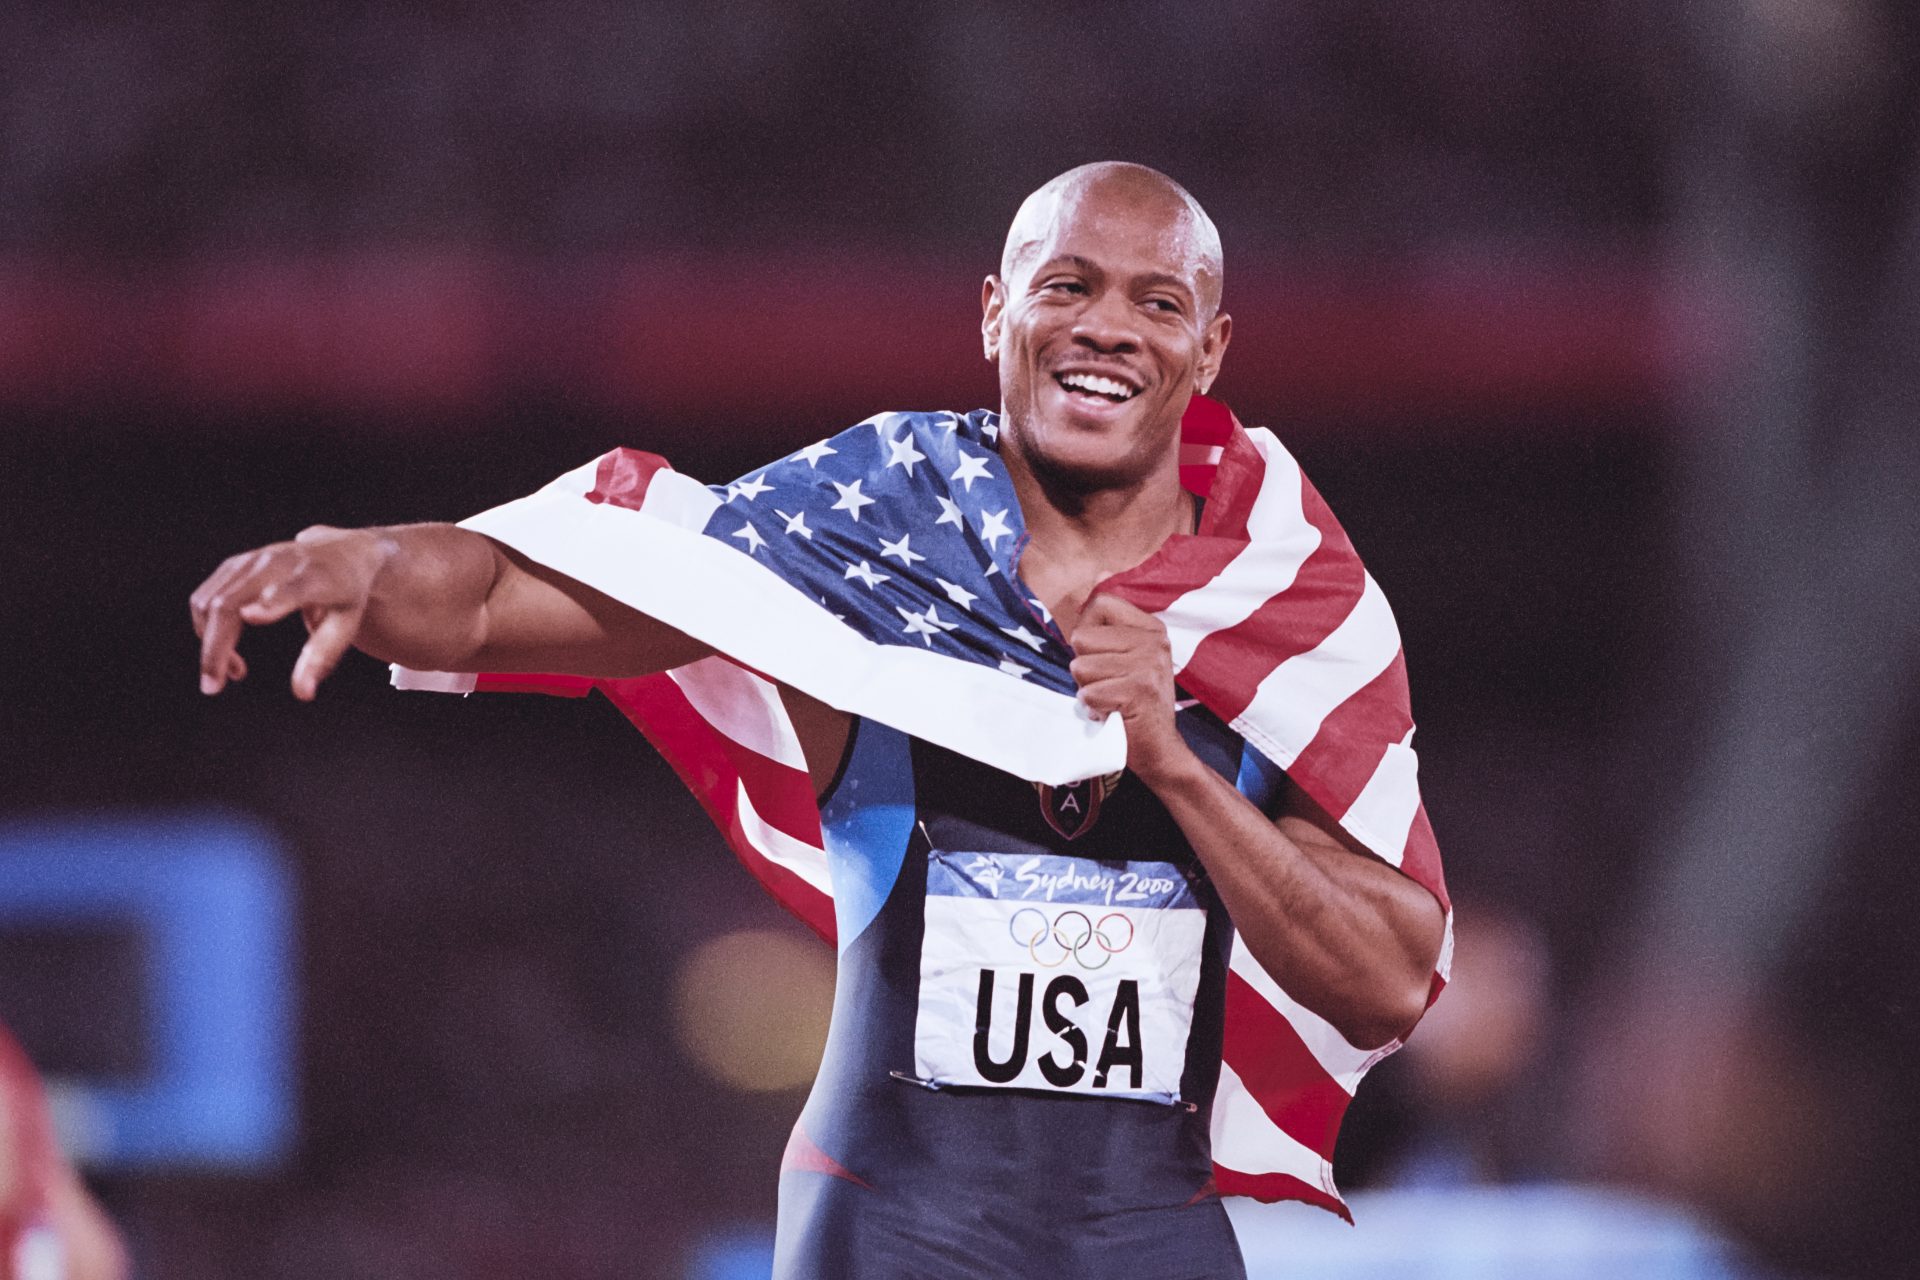 Maurice Greene: The 100m gold medallist plagued with injuries and drug scandals